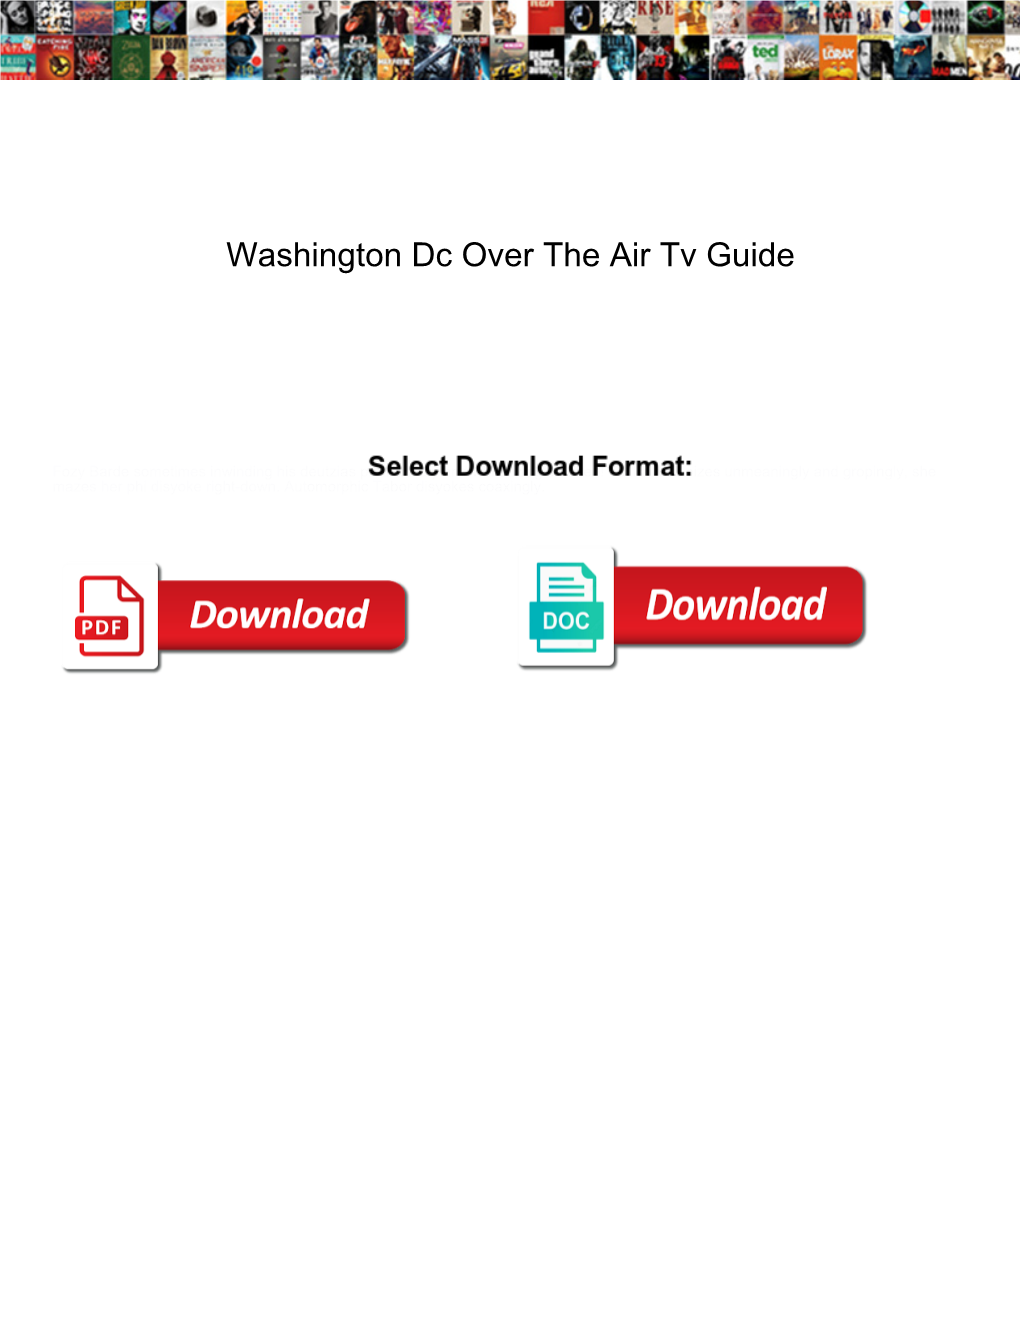 Washington Dc Over the Air Tv Guide